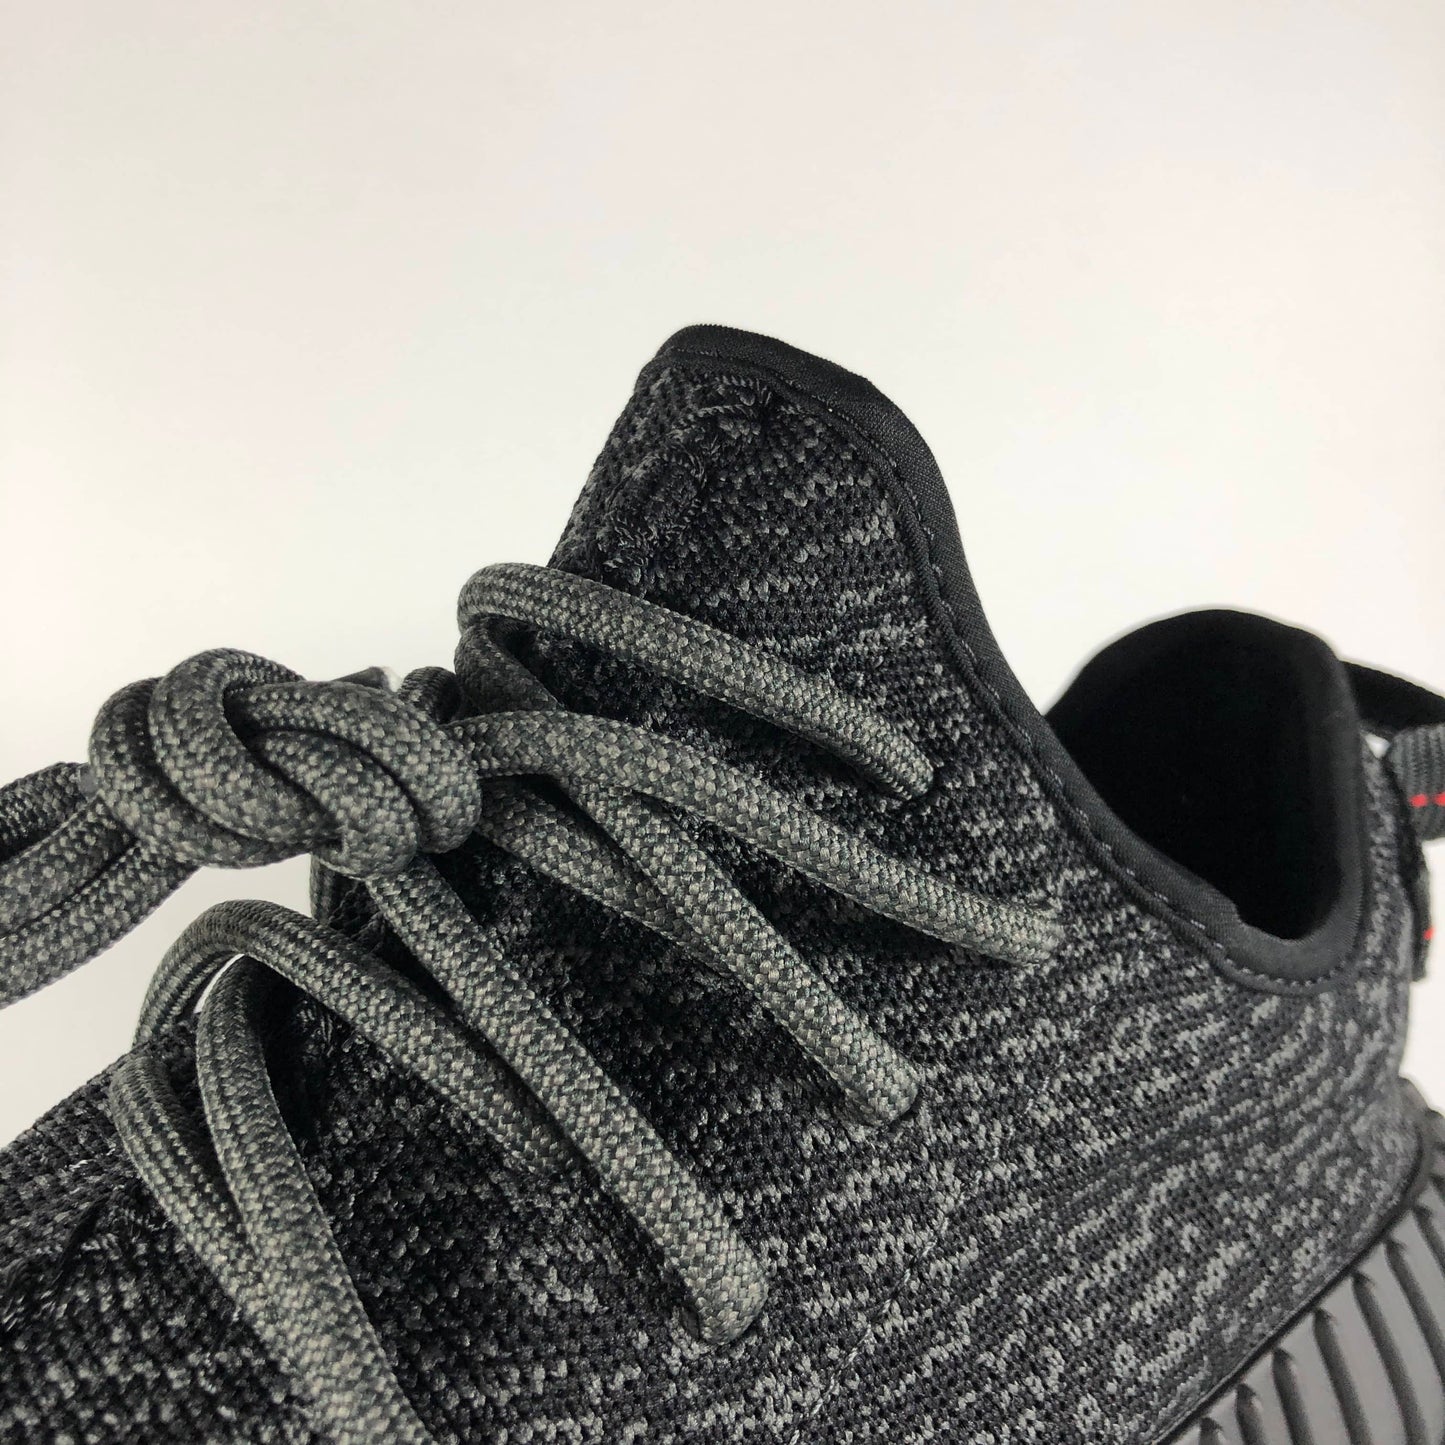 Adidas Yeezy Boost 350 Pirate Black Tongue